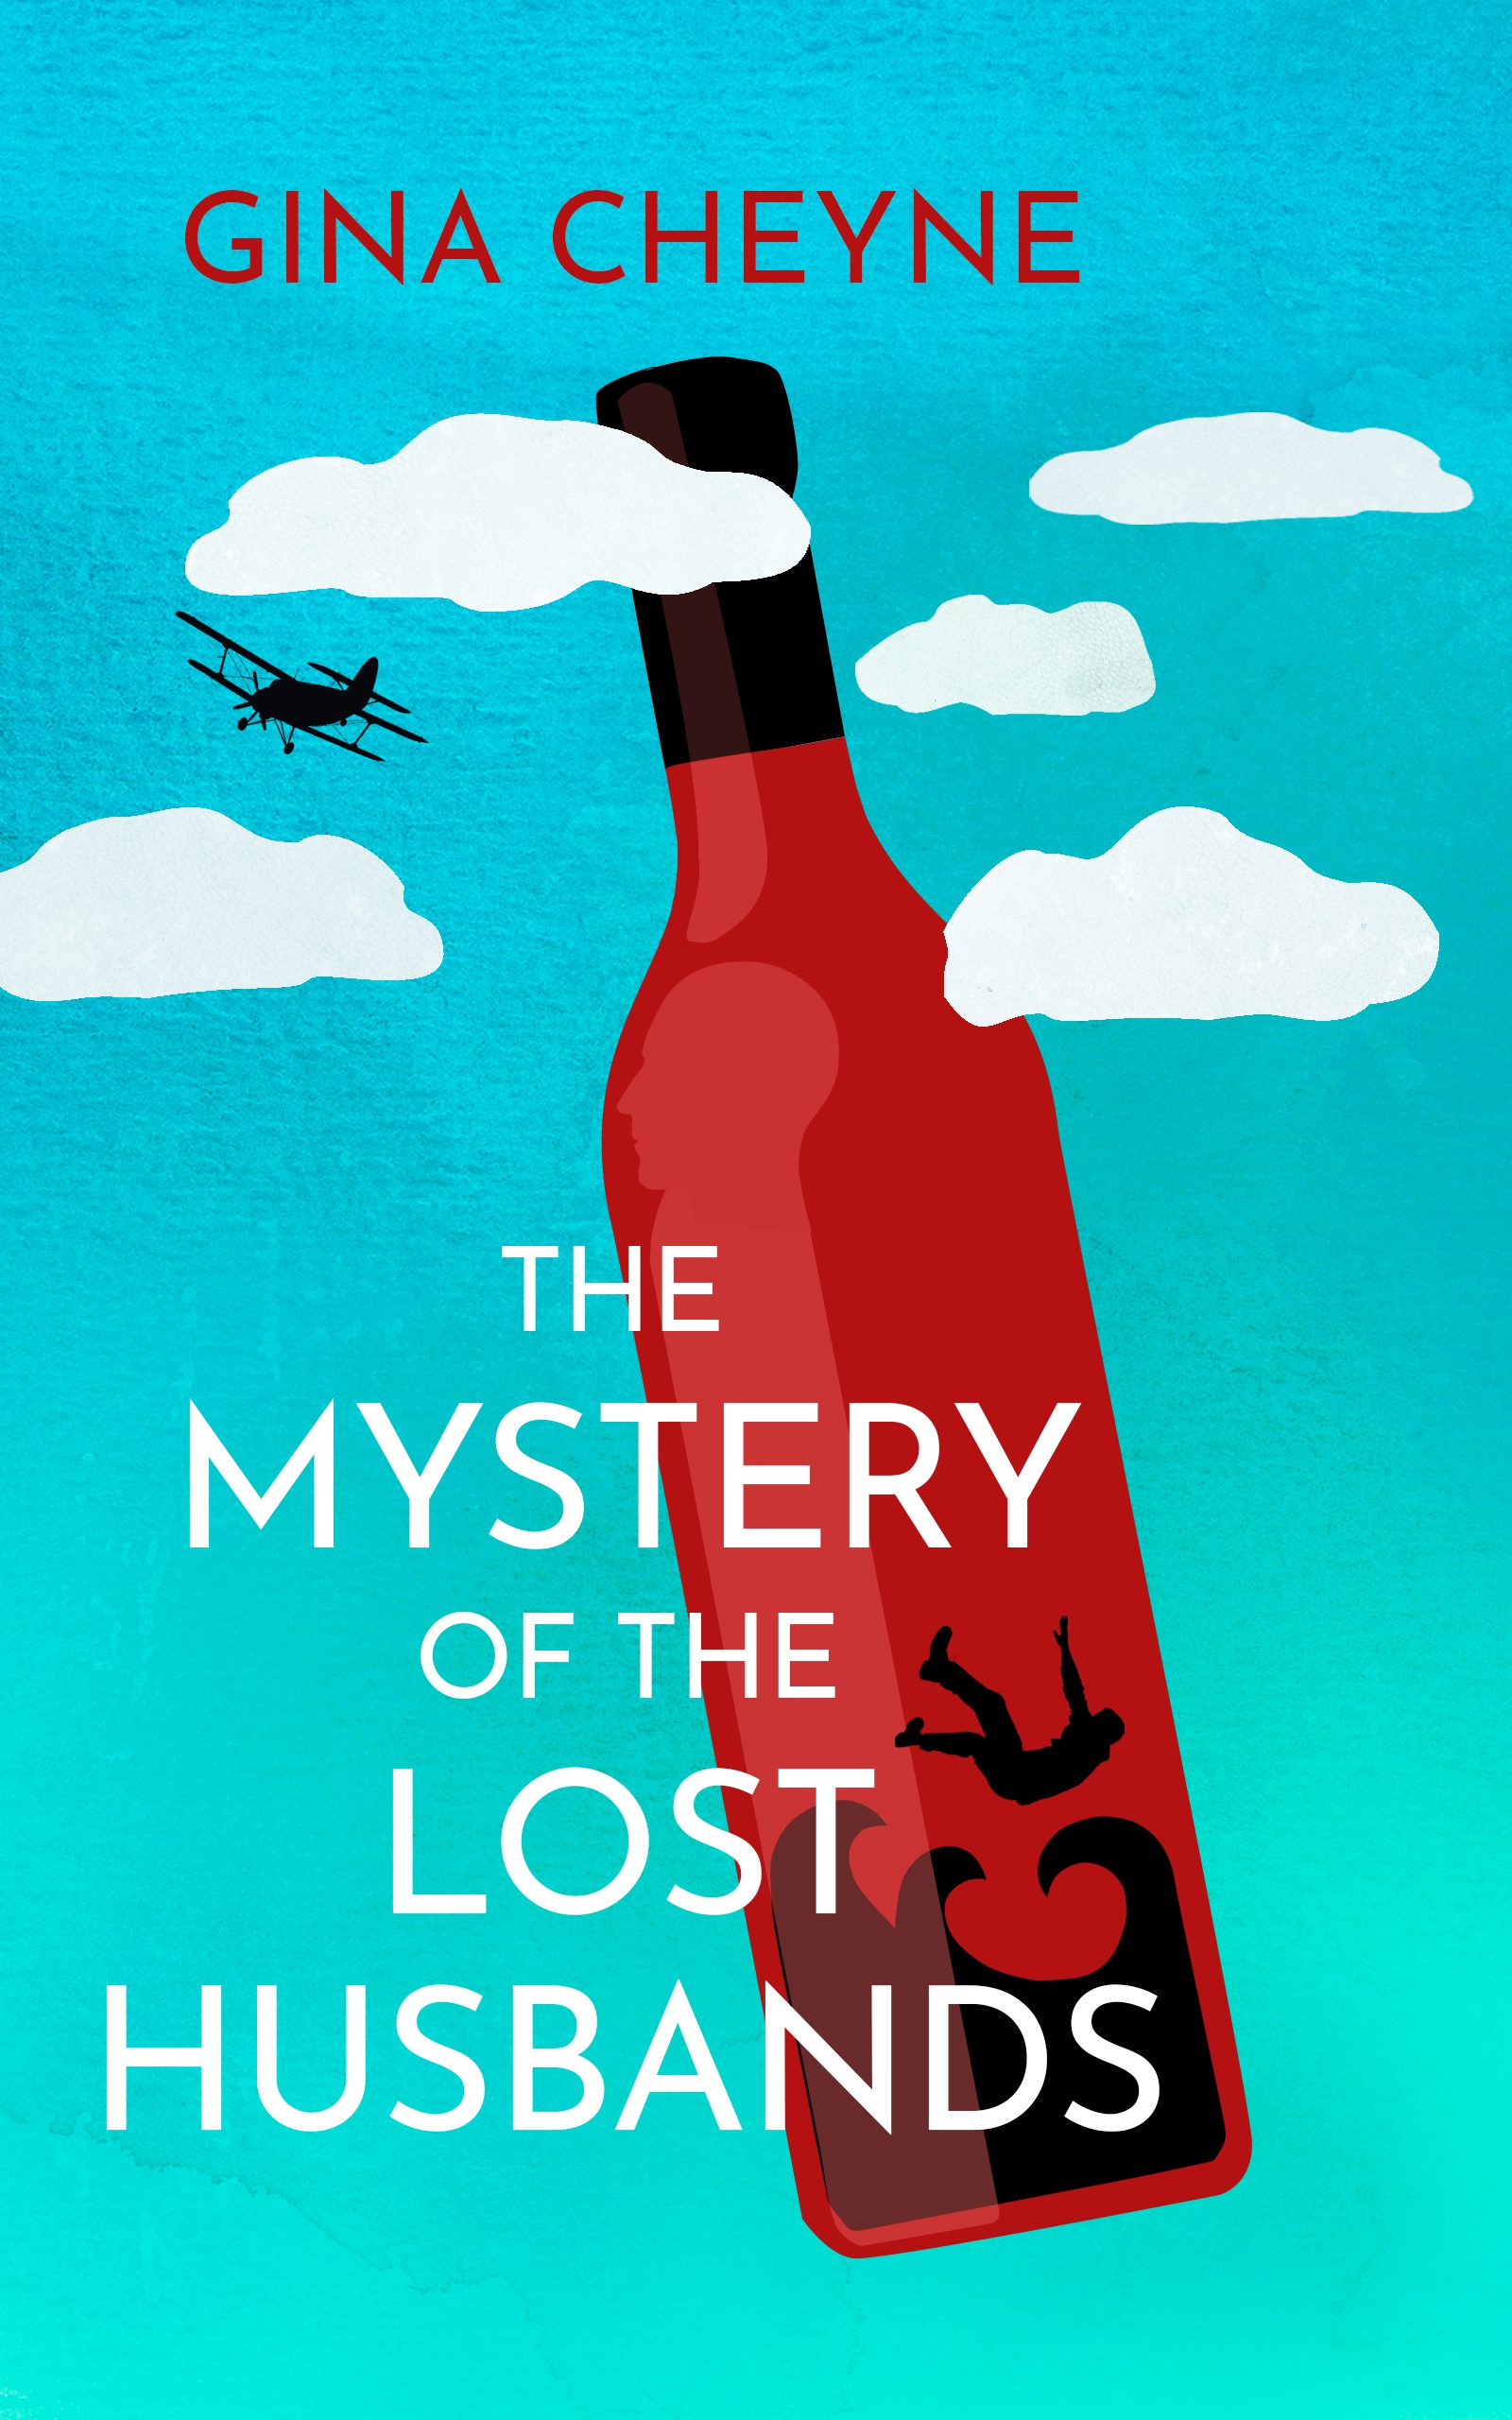 The Mystery of the Lost Husbands book cover